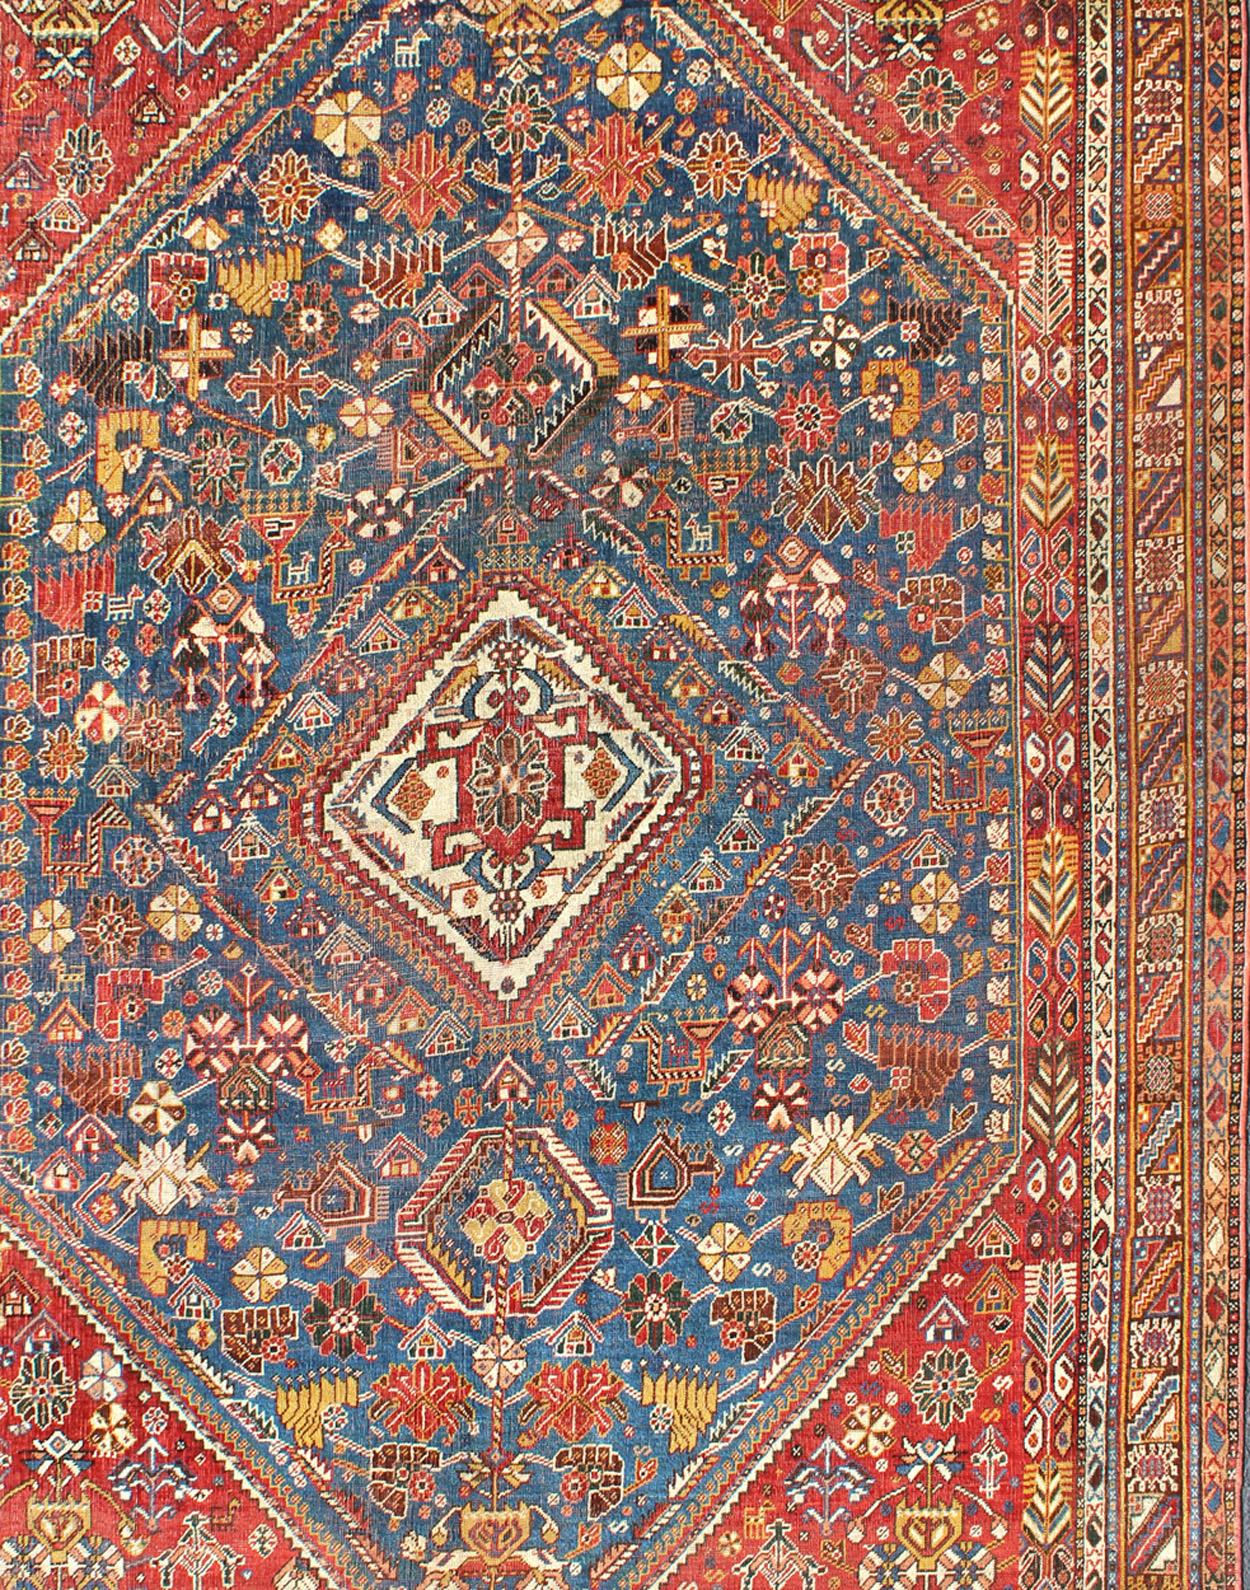 Tribal Antique Persian Qashqai Rug with Medallion Design in Rich Colors, Blue and Red